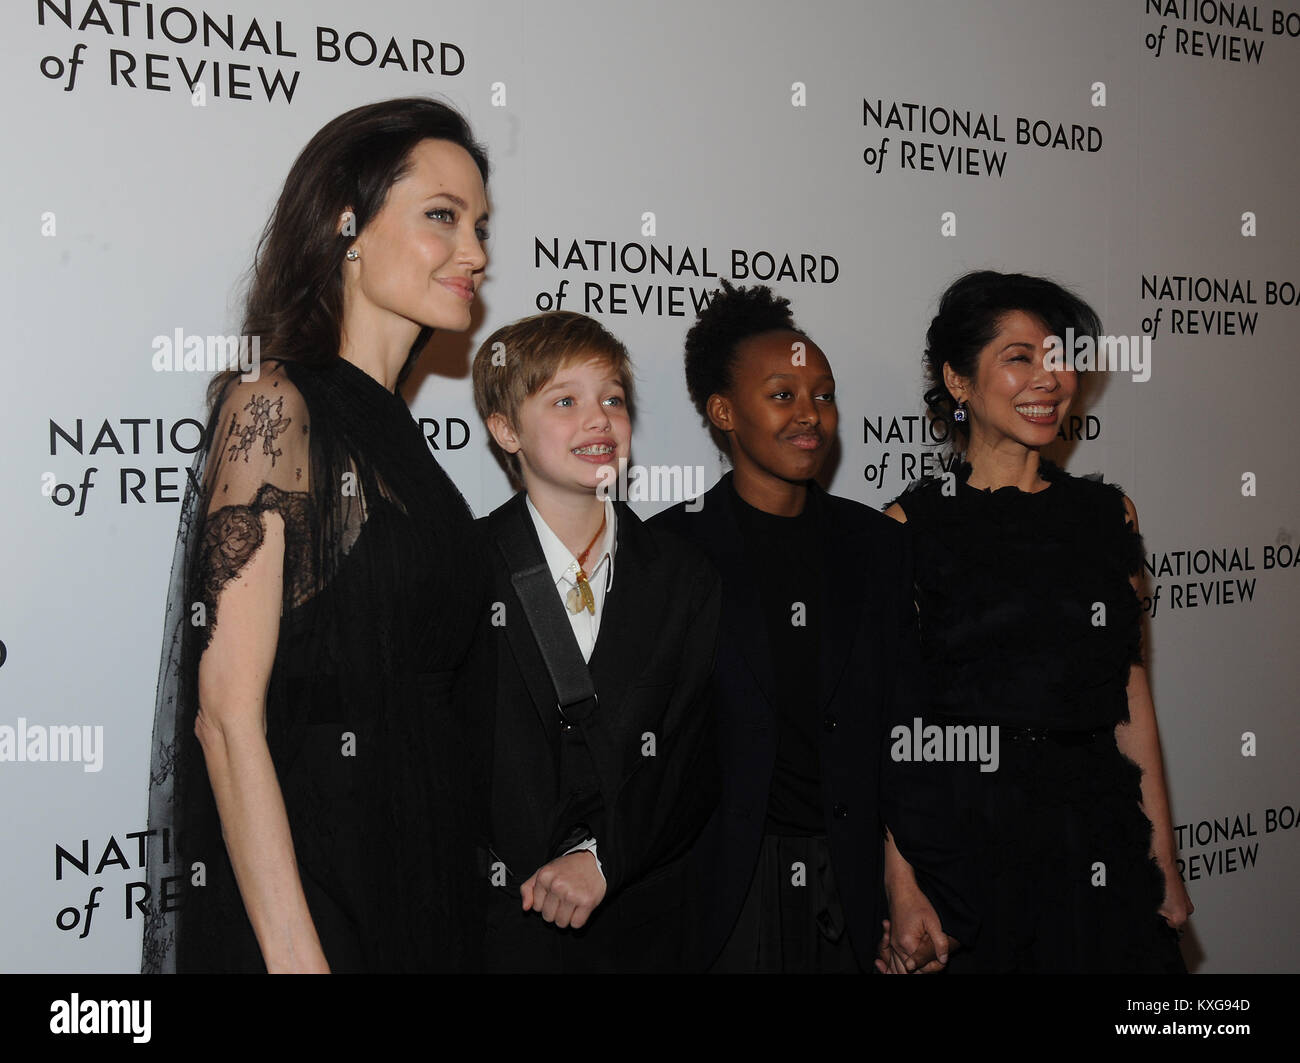 New York, NY, USA. 09th Jan, 2018. Angelina Jolie, Shiloh Jolie-Pitt, Zahara Jolie-Pitt, and Loung Ung attends the 2018 National Board Of Review Awards Gala at Cipriani 42nd Street on January 9, 2018 in New York City. Credit: John Palmer/Media Punch/Alamy Live News Stock Photo